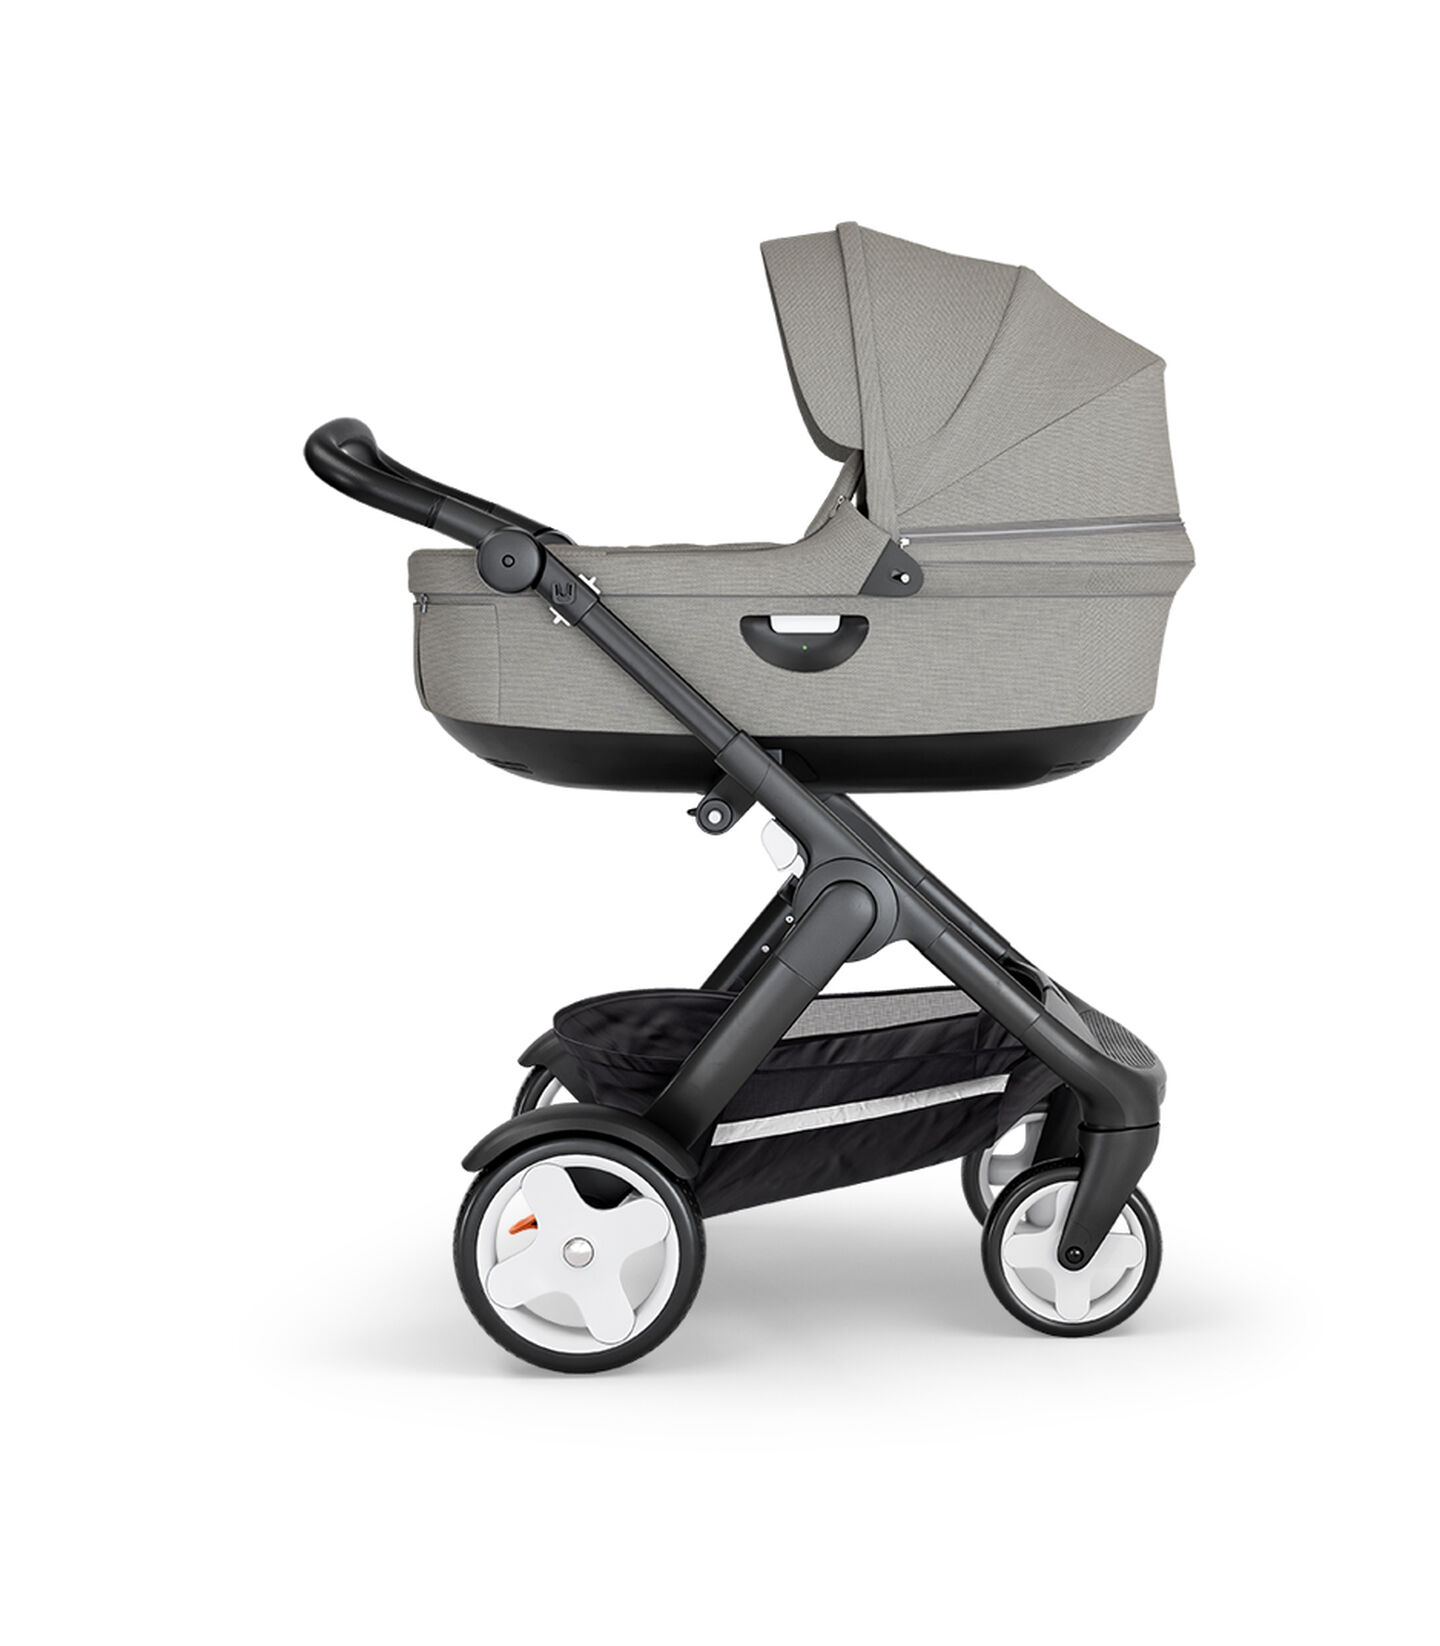 Stokke® Trailz™ with Black Chassis, Black Leatherette and Classic Wheels. Stokke® Stroller Carry Cot, Brushed Grey. view 2